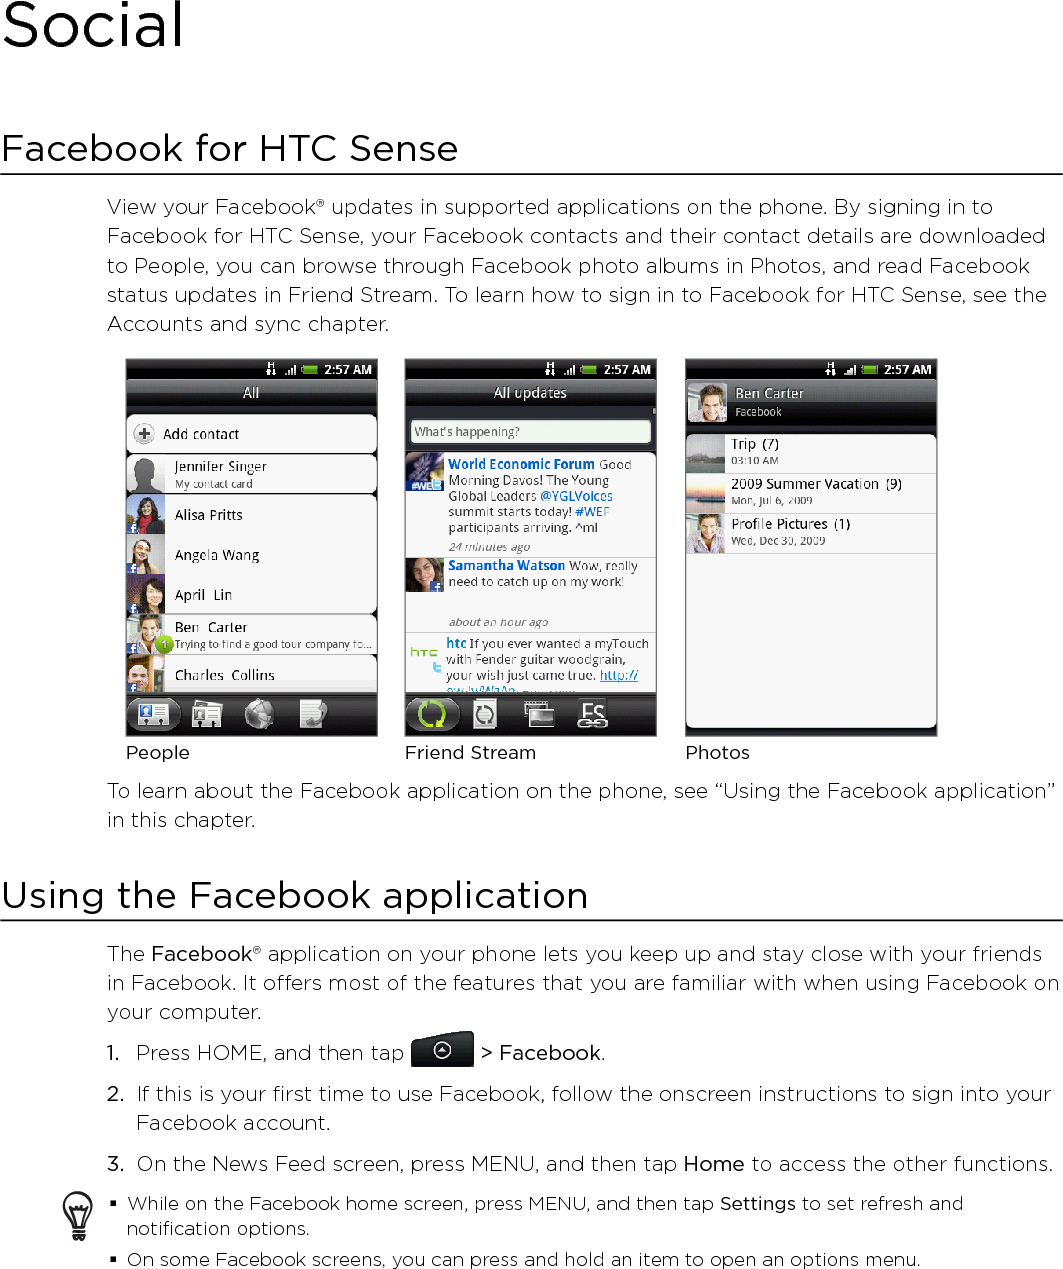 SocialFacebook for HTC SenseView your Facebook® updates in supported applications on the phone. By signing in to Facebook for HTC Sense, your Facebook contacts and their contact details are downloaded to People, you can browse through Facebook photo albums in Photos, and read Facebook status updates in Friend Stream. To learn how to sign in to Facebook for HTC Sense, see the Accounts and sync chapter.People PhotosFriend StreamTo learn about the Facebook application on the phone, see “Using the Facebook application” in this chapter. Using the Facebook applicationThe Facebook® application on your phone lets you keep up and stay close with your friends in Facebook. It offers most of the features that you are familiar with when using Facebook on your computer.Press HOME, and then tap   &gt; Facebook.If this is your first time to use Facebook, follow the onscreen instructions to sign into your Facebook account.3.  On the News Feed screen, press MENU, and then tap Home to access the other functions.While on the Facebook home screen, press MENU, and then tap Settings to set refresh and notification options.On some Facebook screens, you can press and hold an item to open an options menu. 1.2.